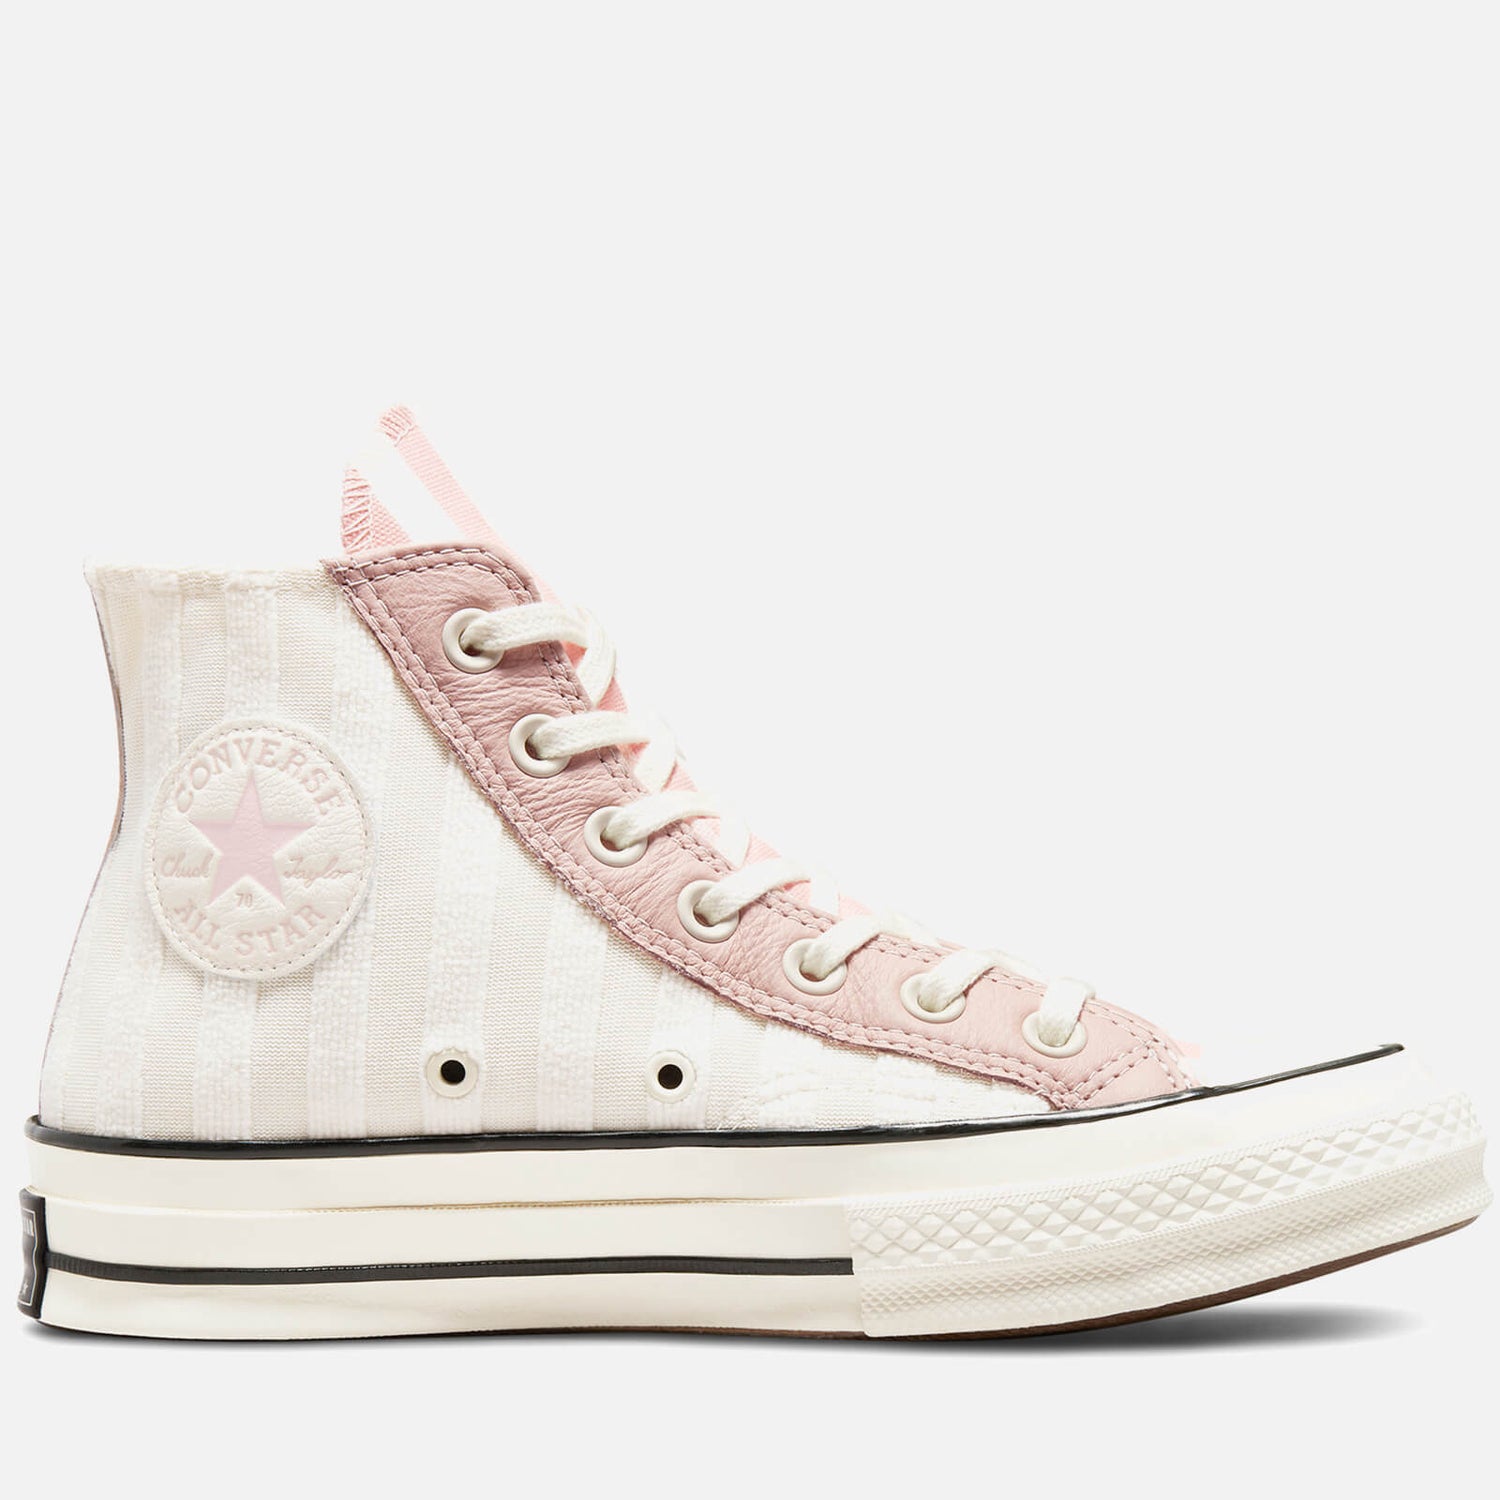 Converse Women's Chuck 70 Striped Terry Cloth Hi-Top Trainers - Egret/Pink Clay/Black - UK 7